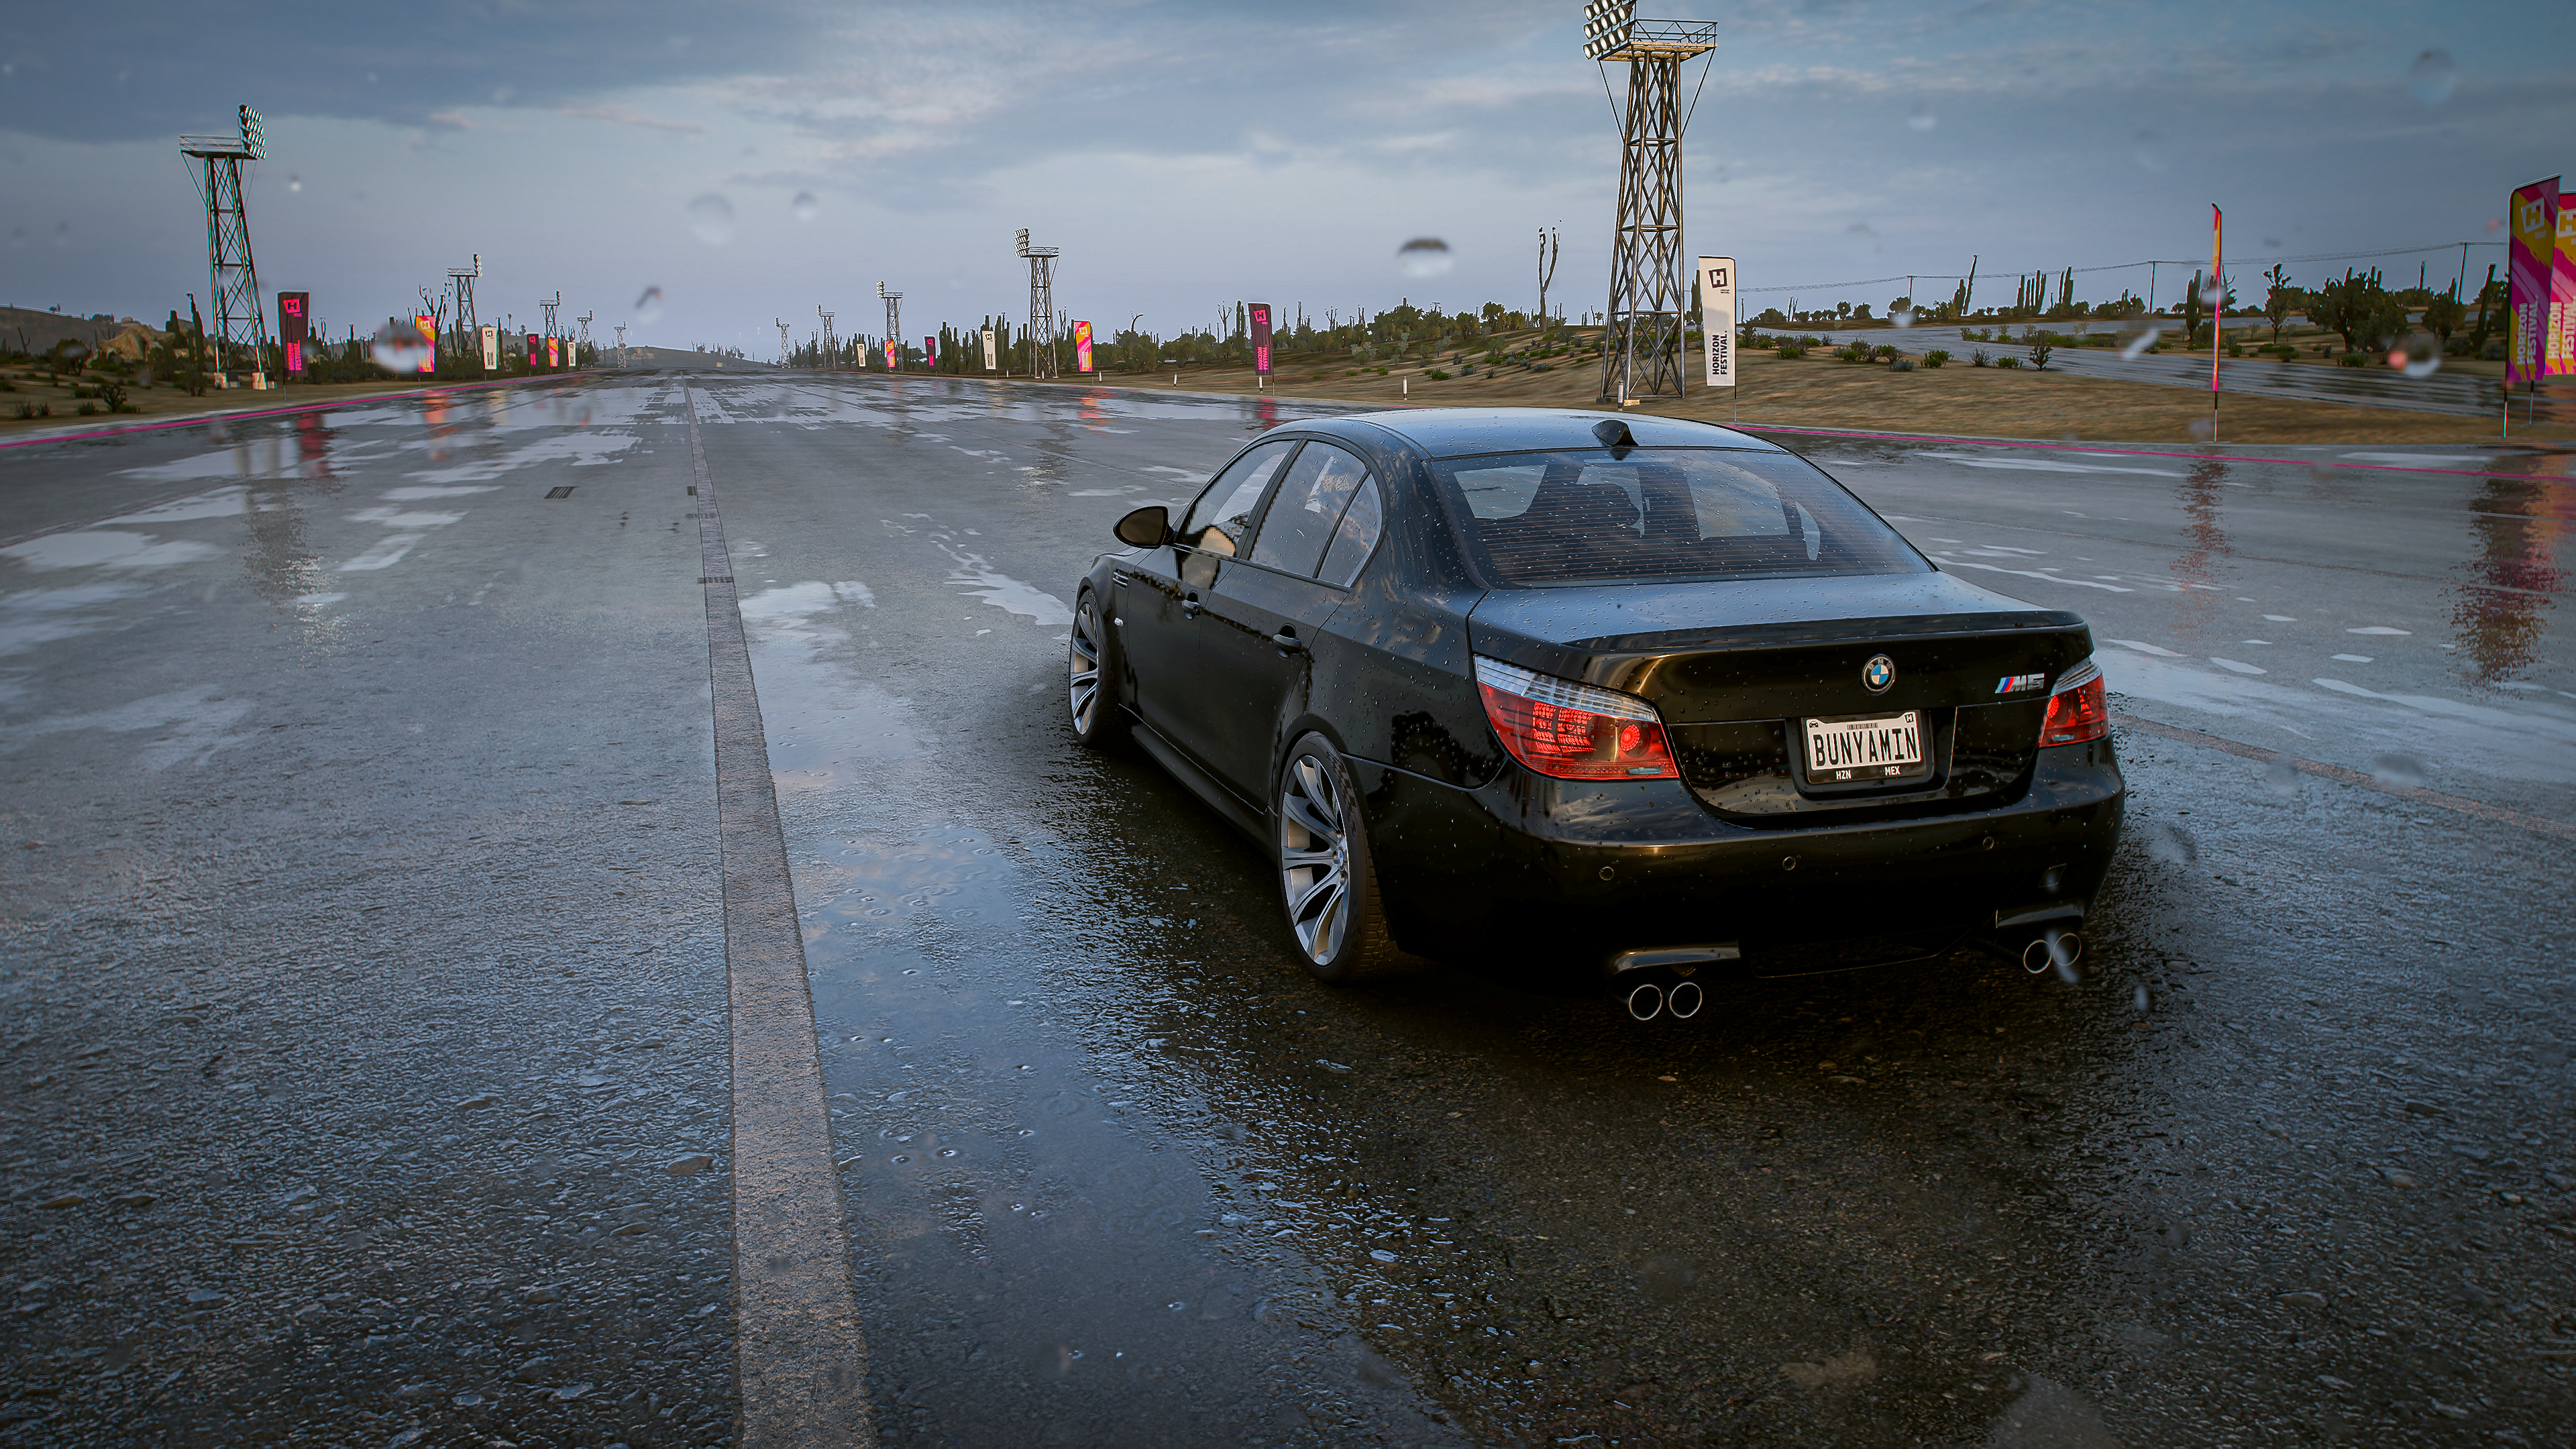 Forza Forza Horizon Forza Horizon 5 BMW BMW E60 BMW M5 Video Games Car Vehicle Reflection Mexican Dr 3840x2160